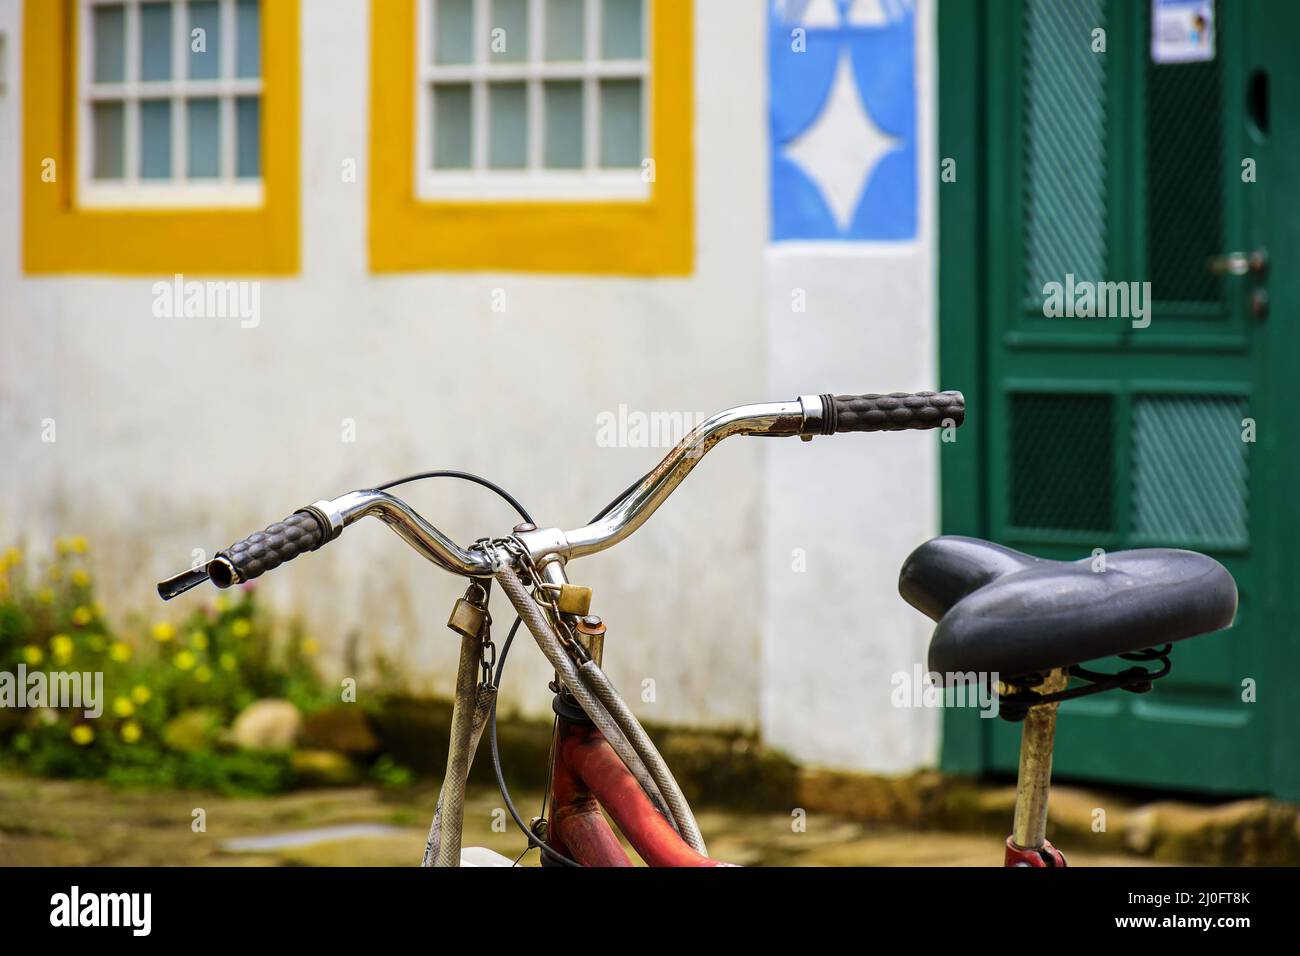 Old bicycle stopped in front of the colonial style houses Stock Photo